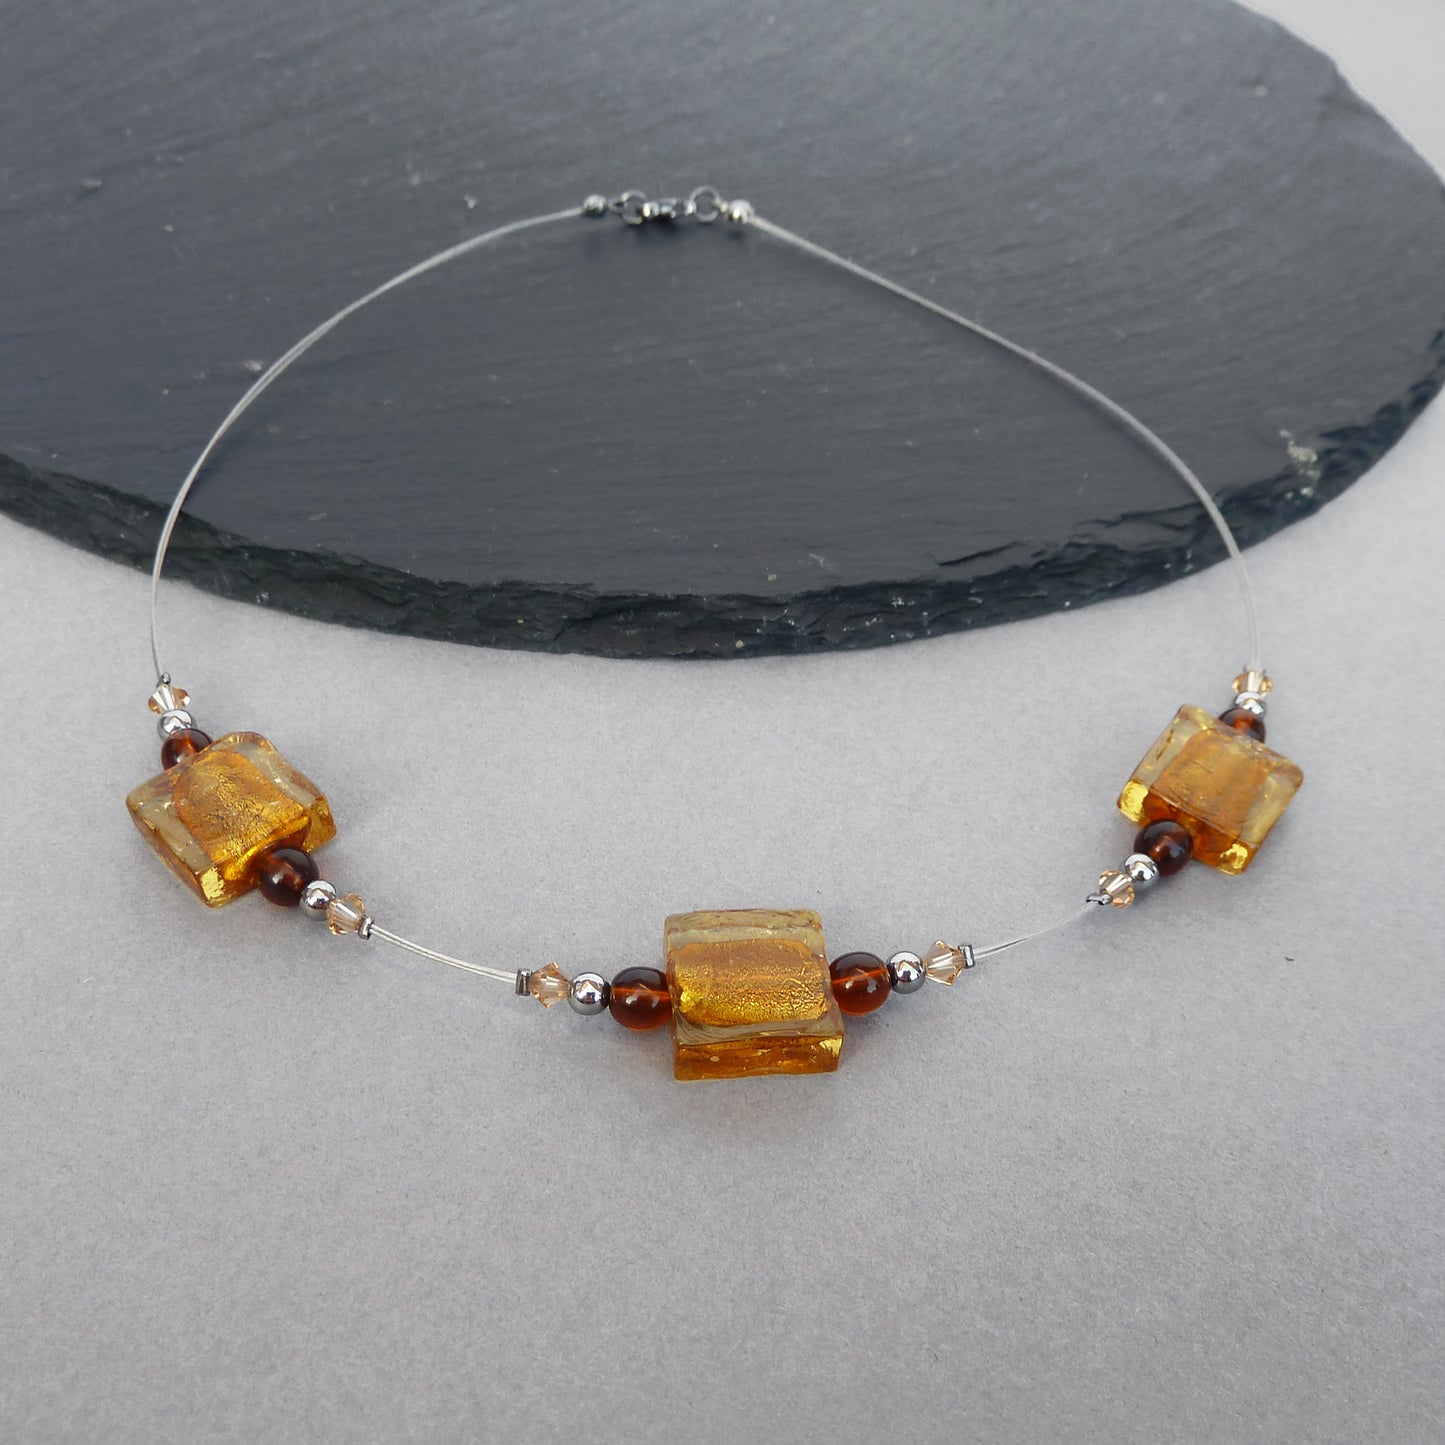 Amber lampwork bead necklace